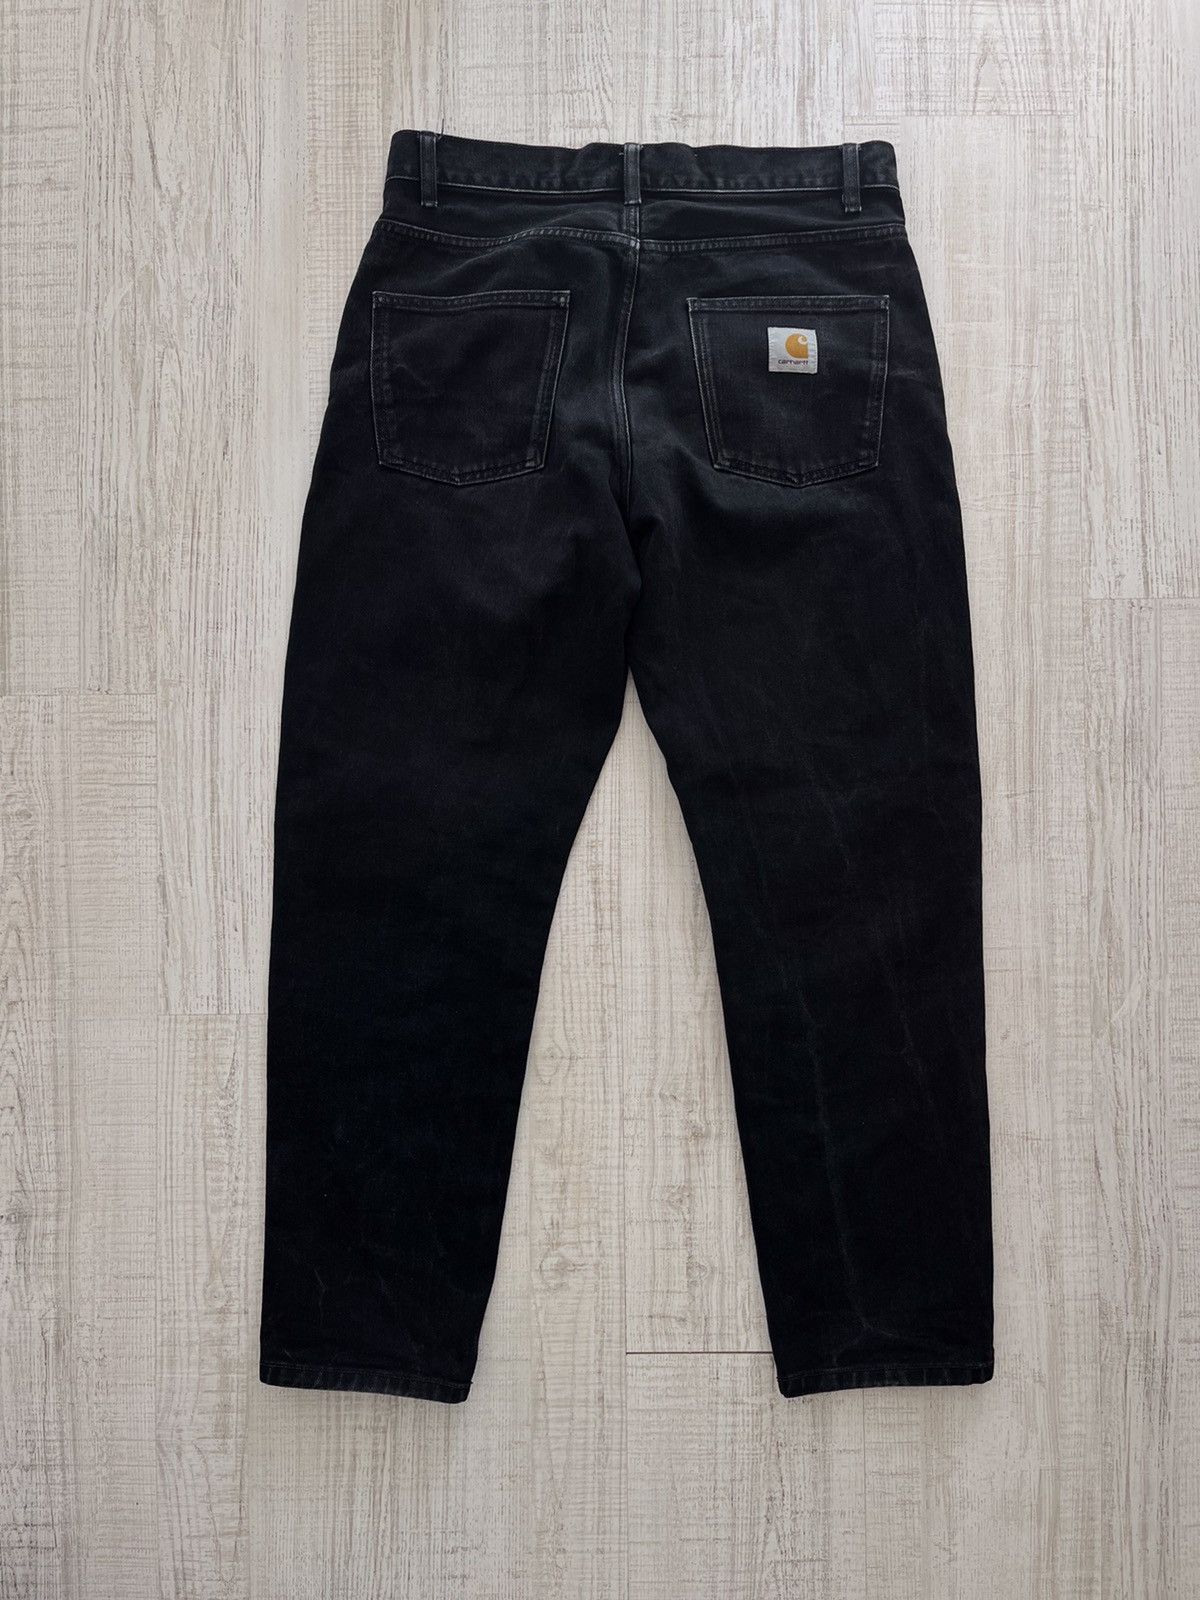 Pre-owned Carhartt Jeans  In Black